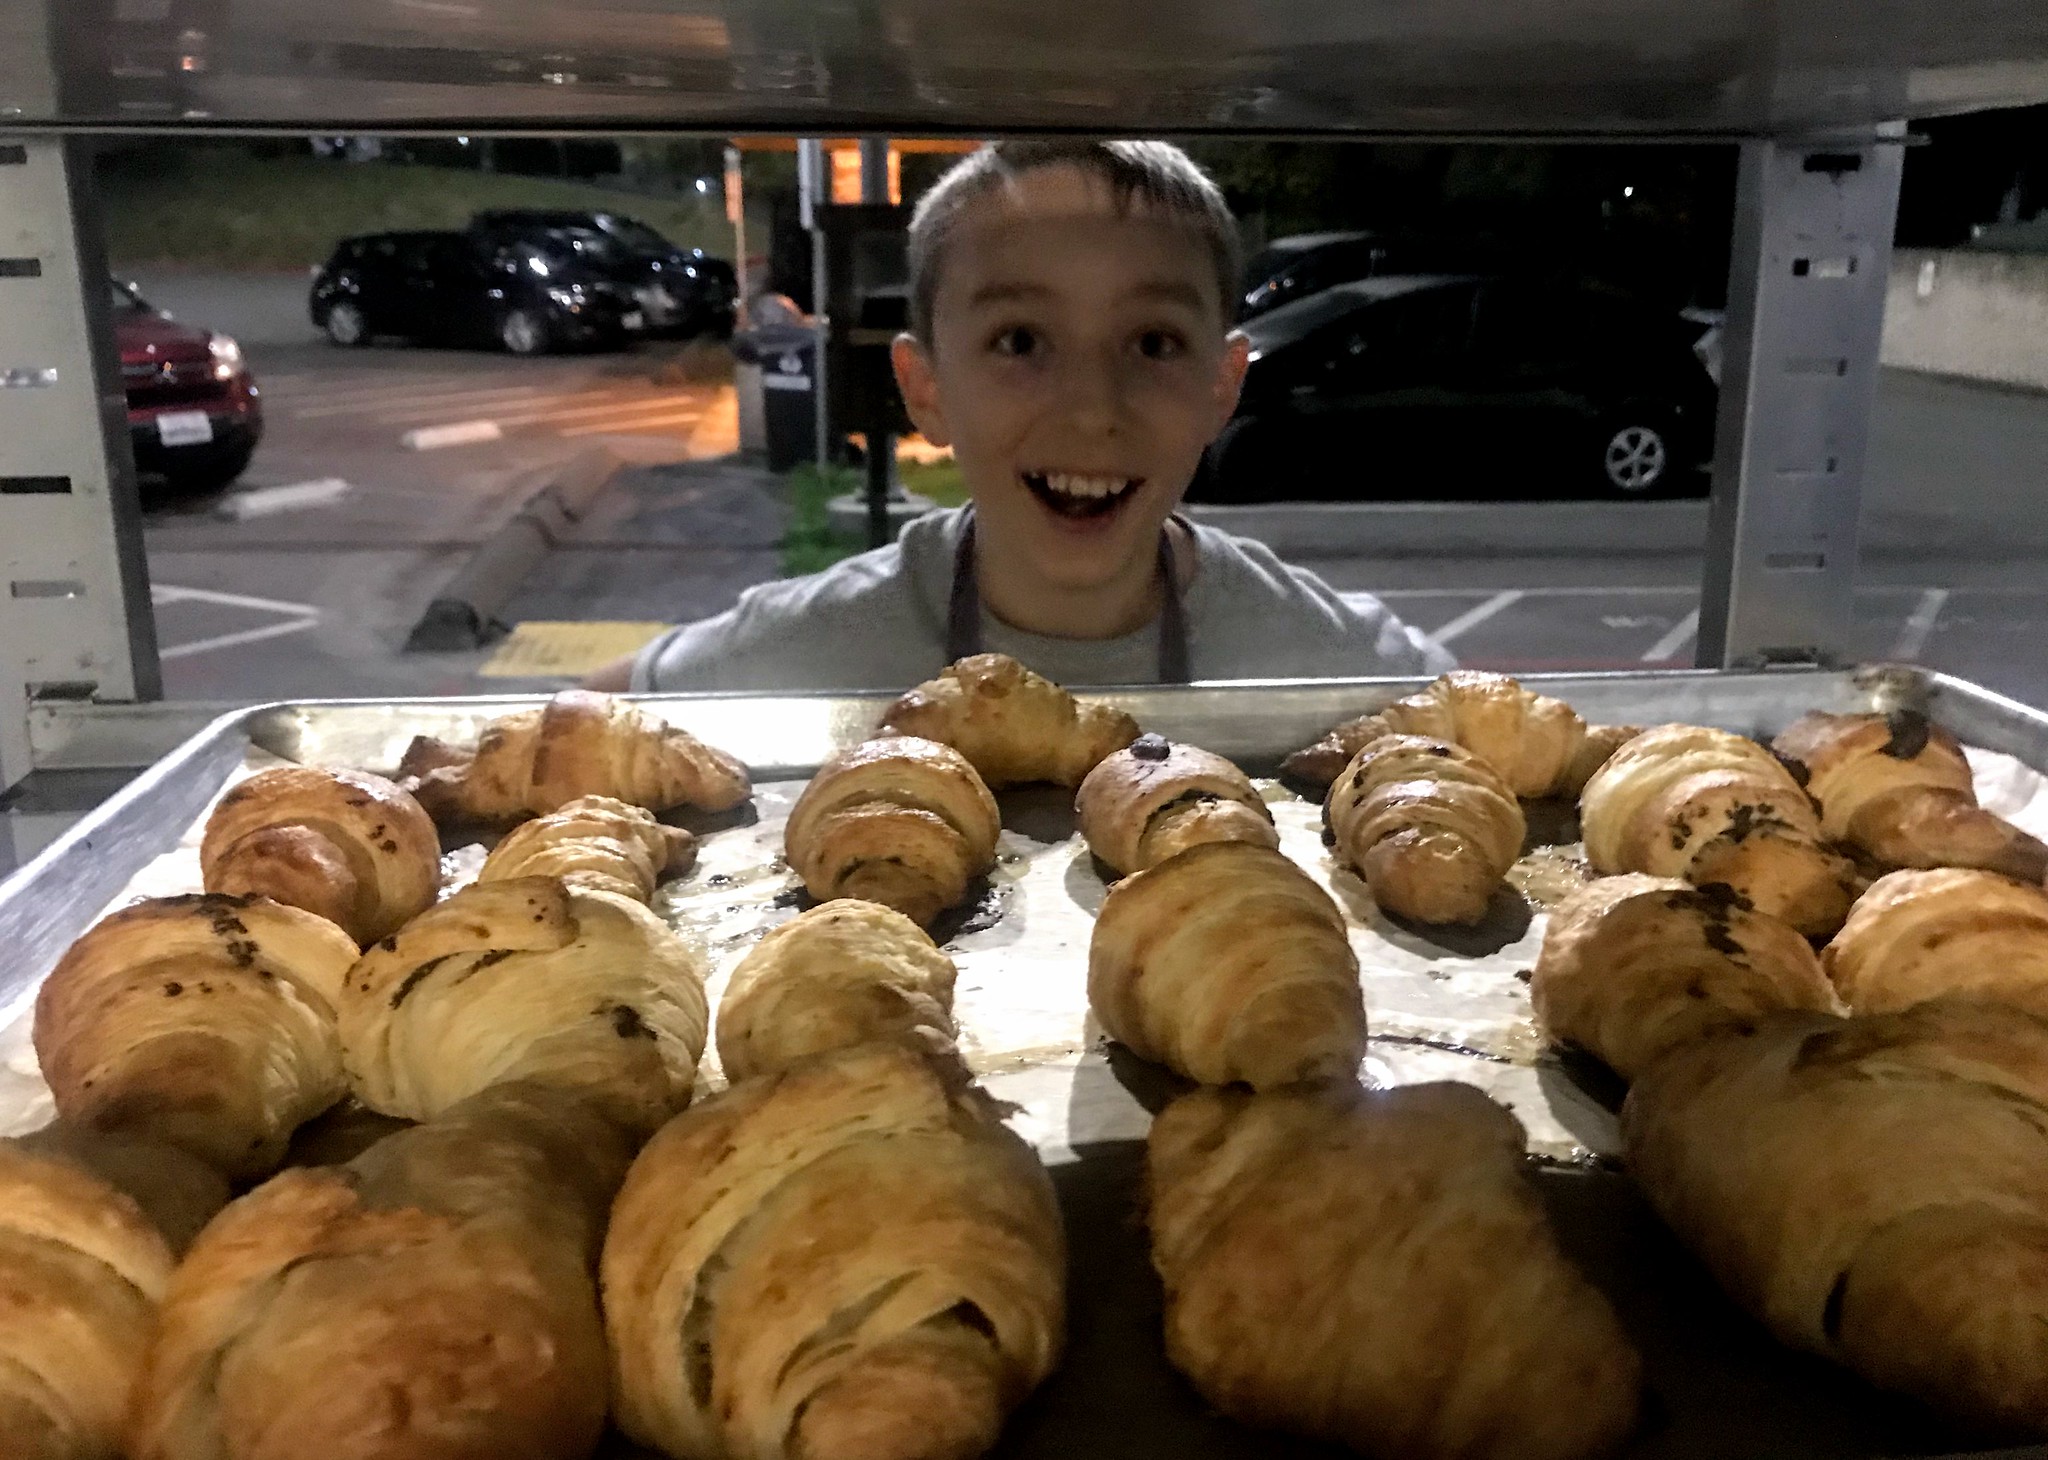 Casper is Happy With our Croissants Fresh From the Convection Oven